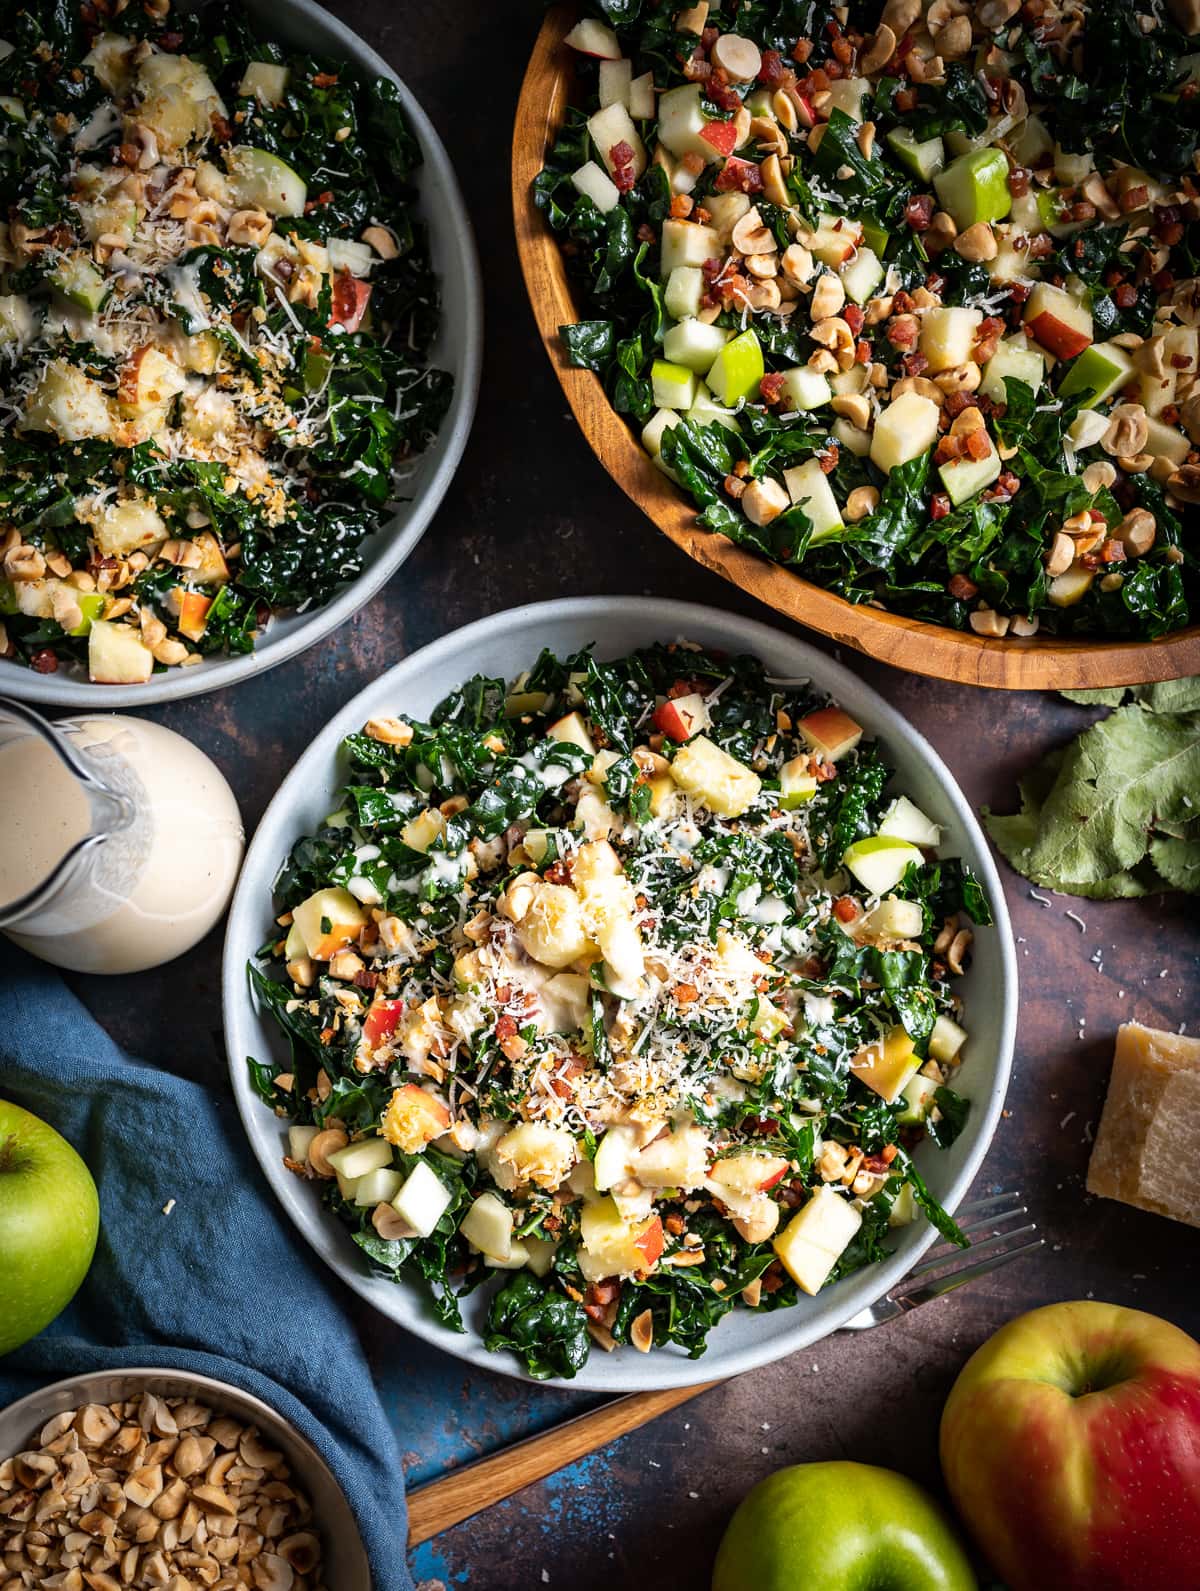 large wood serving bowl and two smaller blue ceramic bowls filled with chopped tuscan kale with hazelnuts apples parmesan cheese bottle of vinaigrette